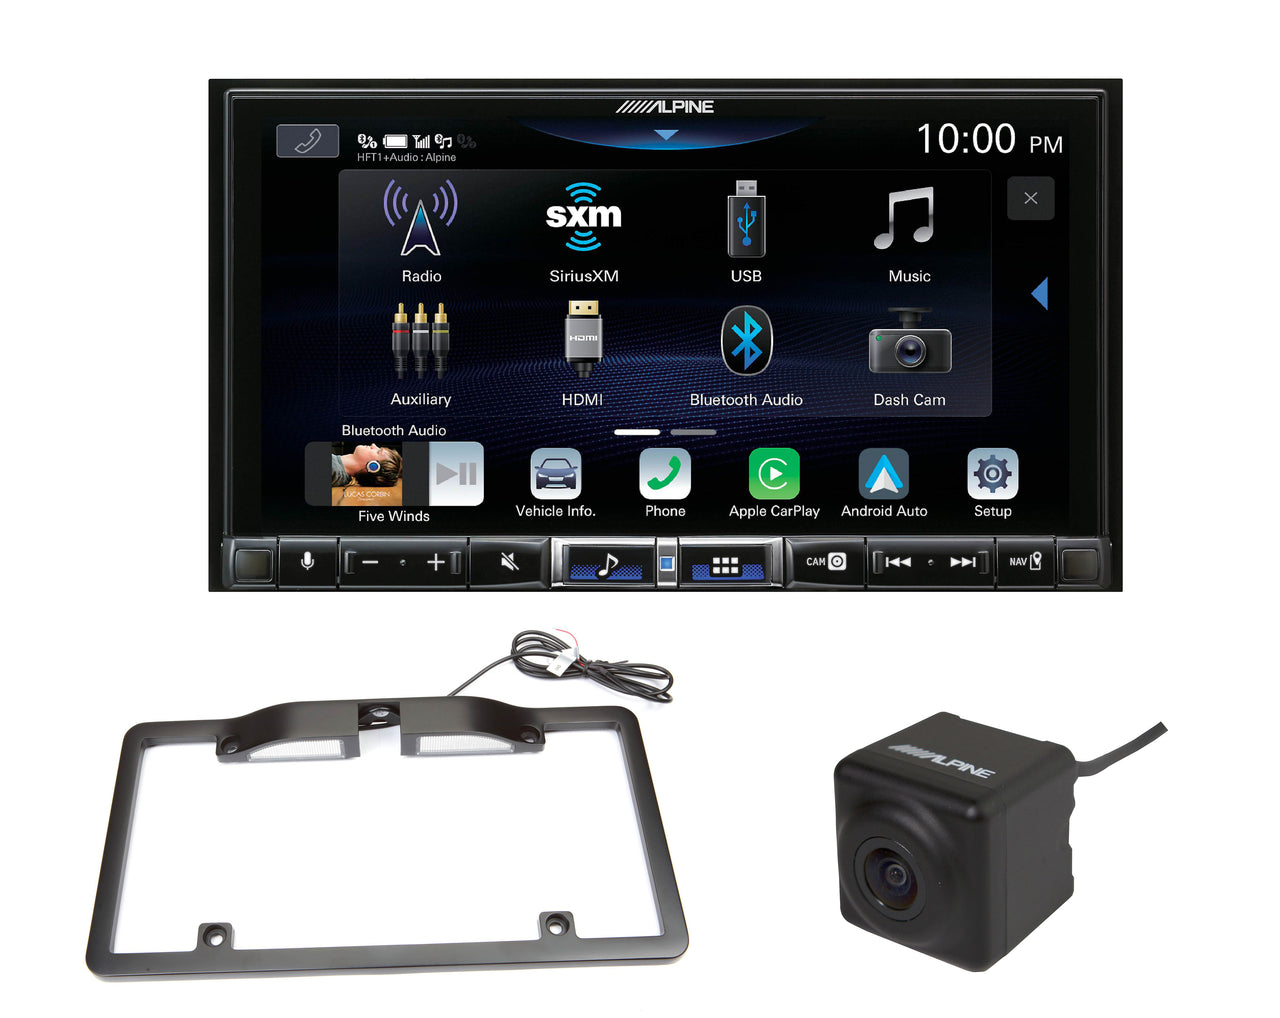 Alpine iLX-507 7" Digital multimedia receiver+Alpine HCE-C1100 Backup camera surface-mount+ Alpine KTX-C10LP License plate mounting kit for select Alpine rear-view cameras